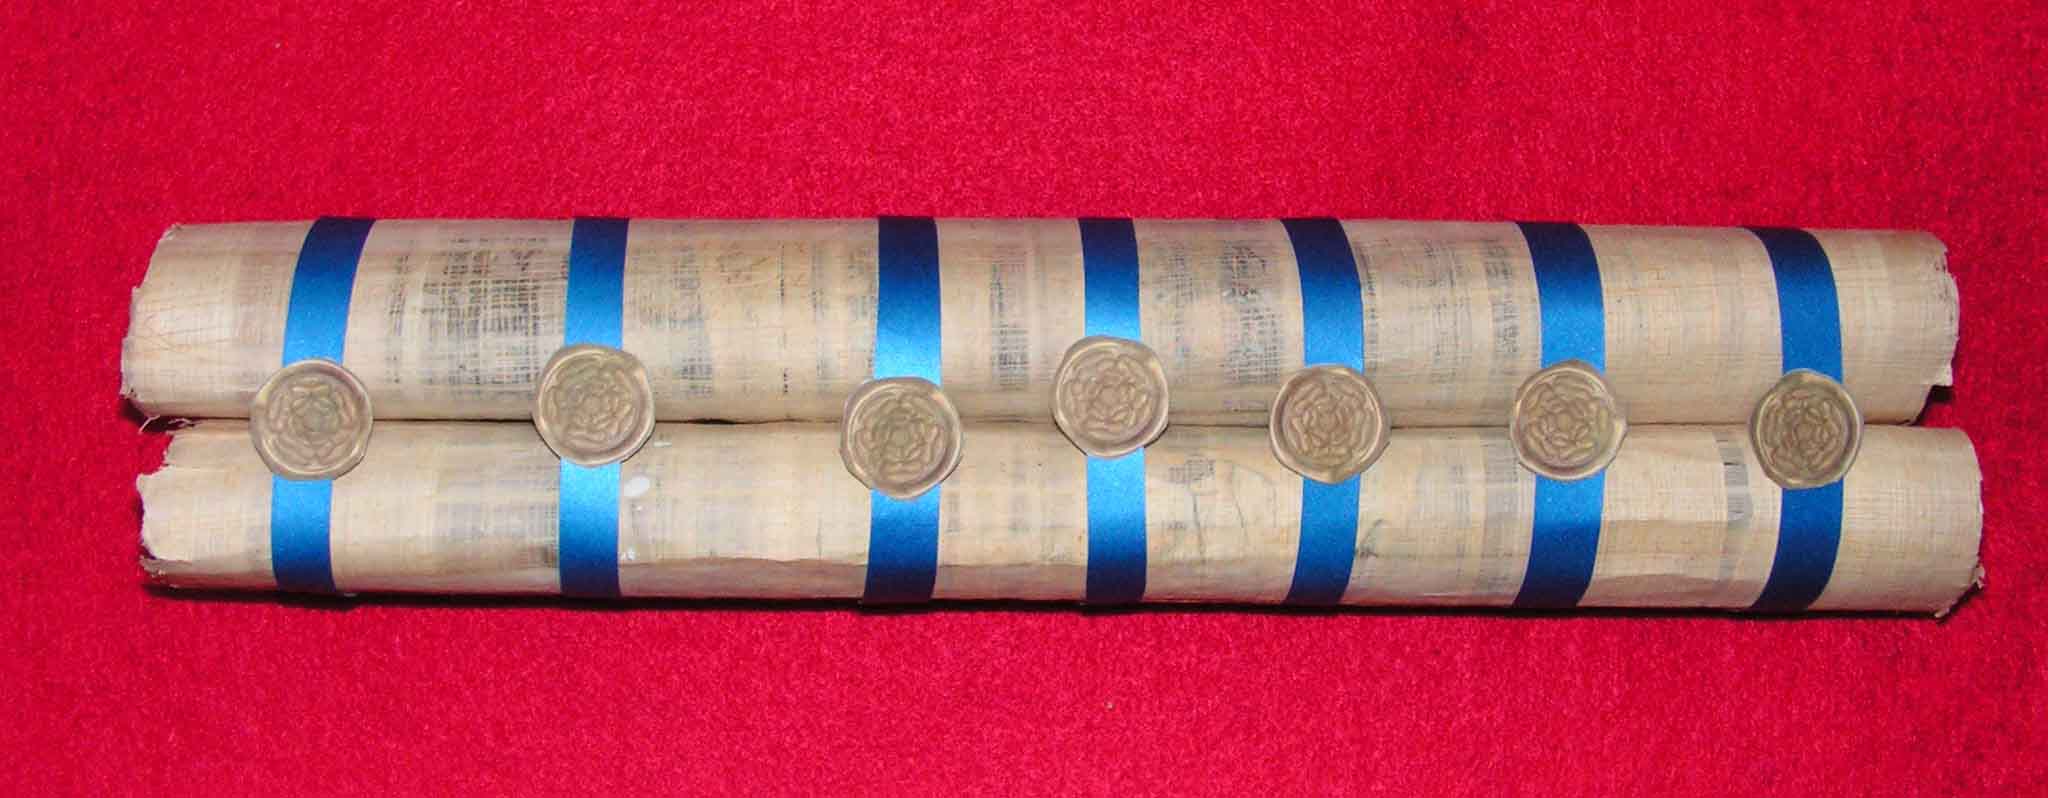 Scroll with 7 Seals